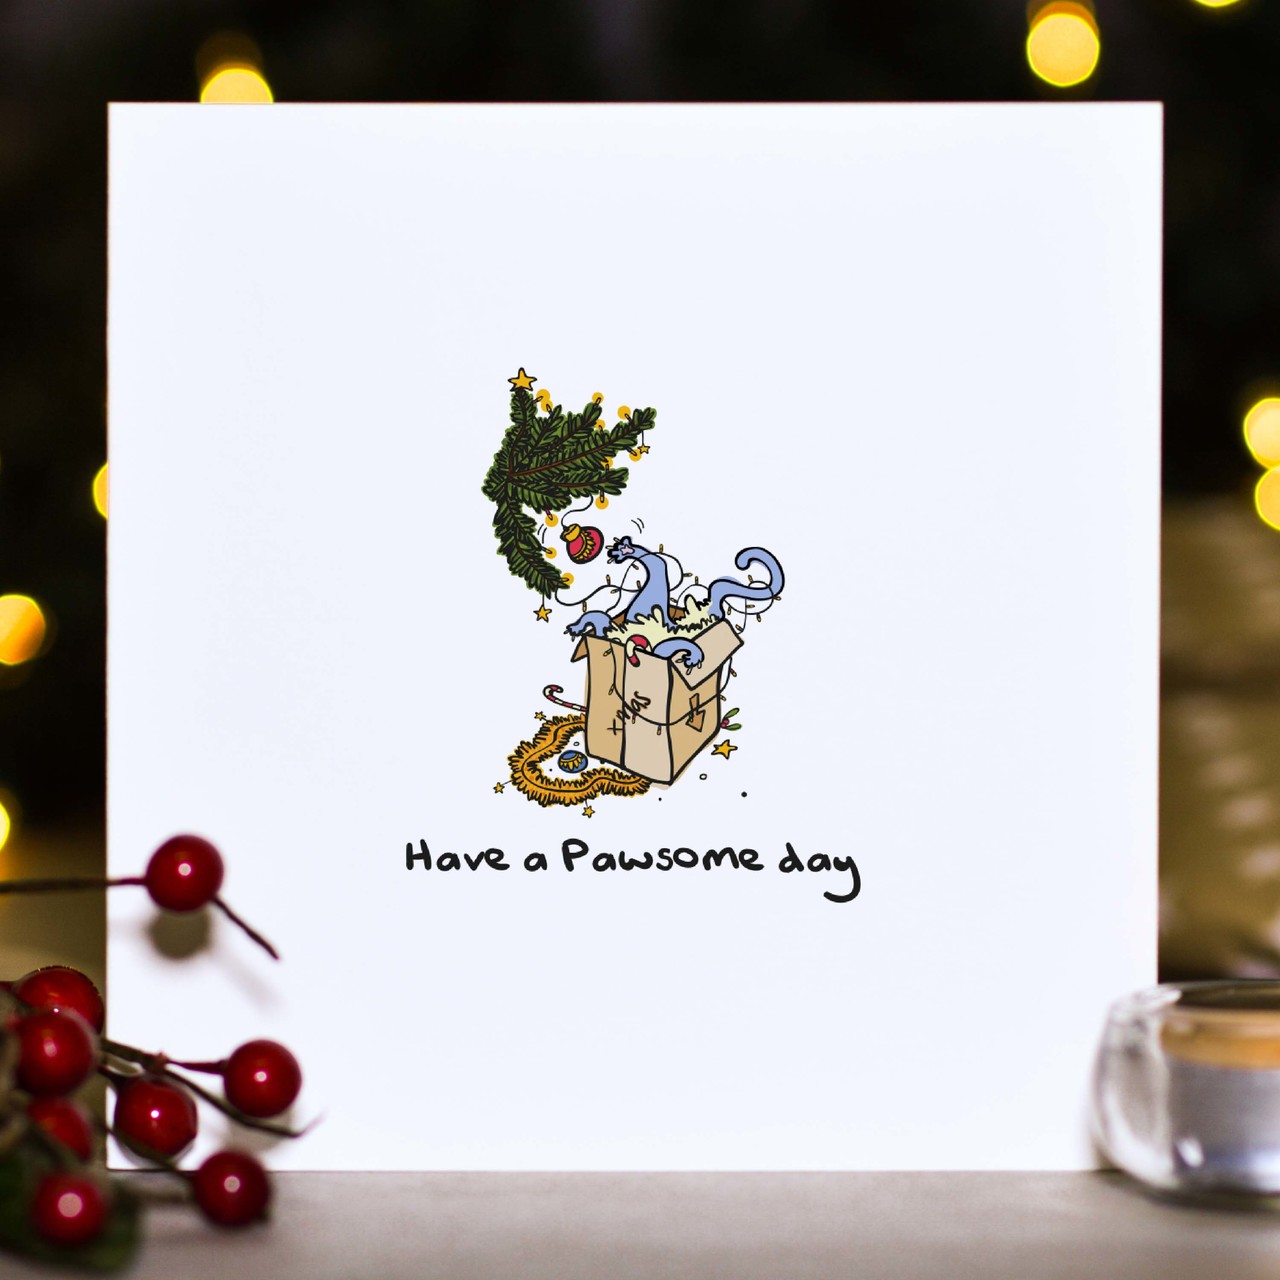 Have a pawsome day Christmas Card